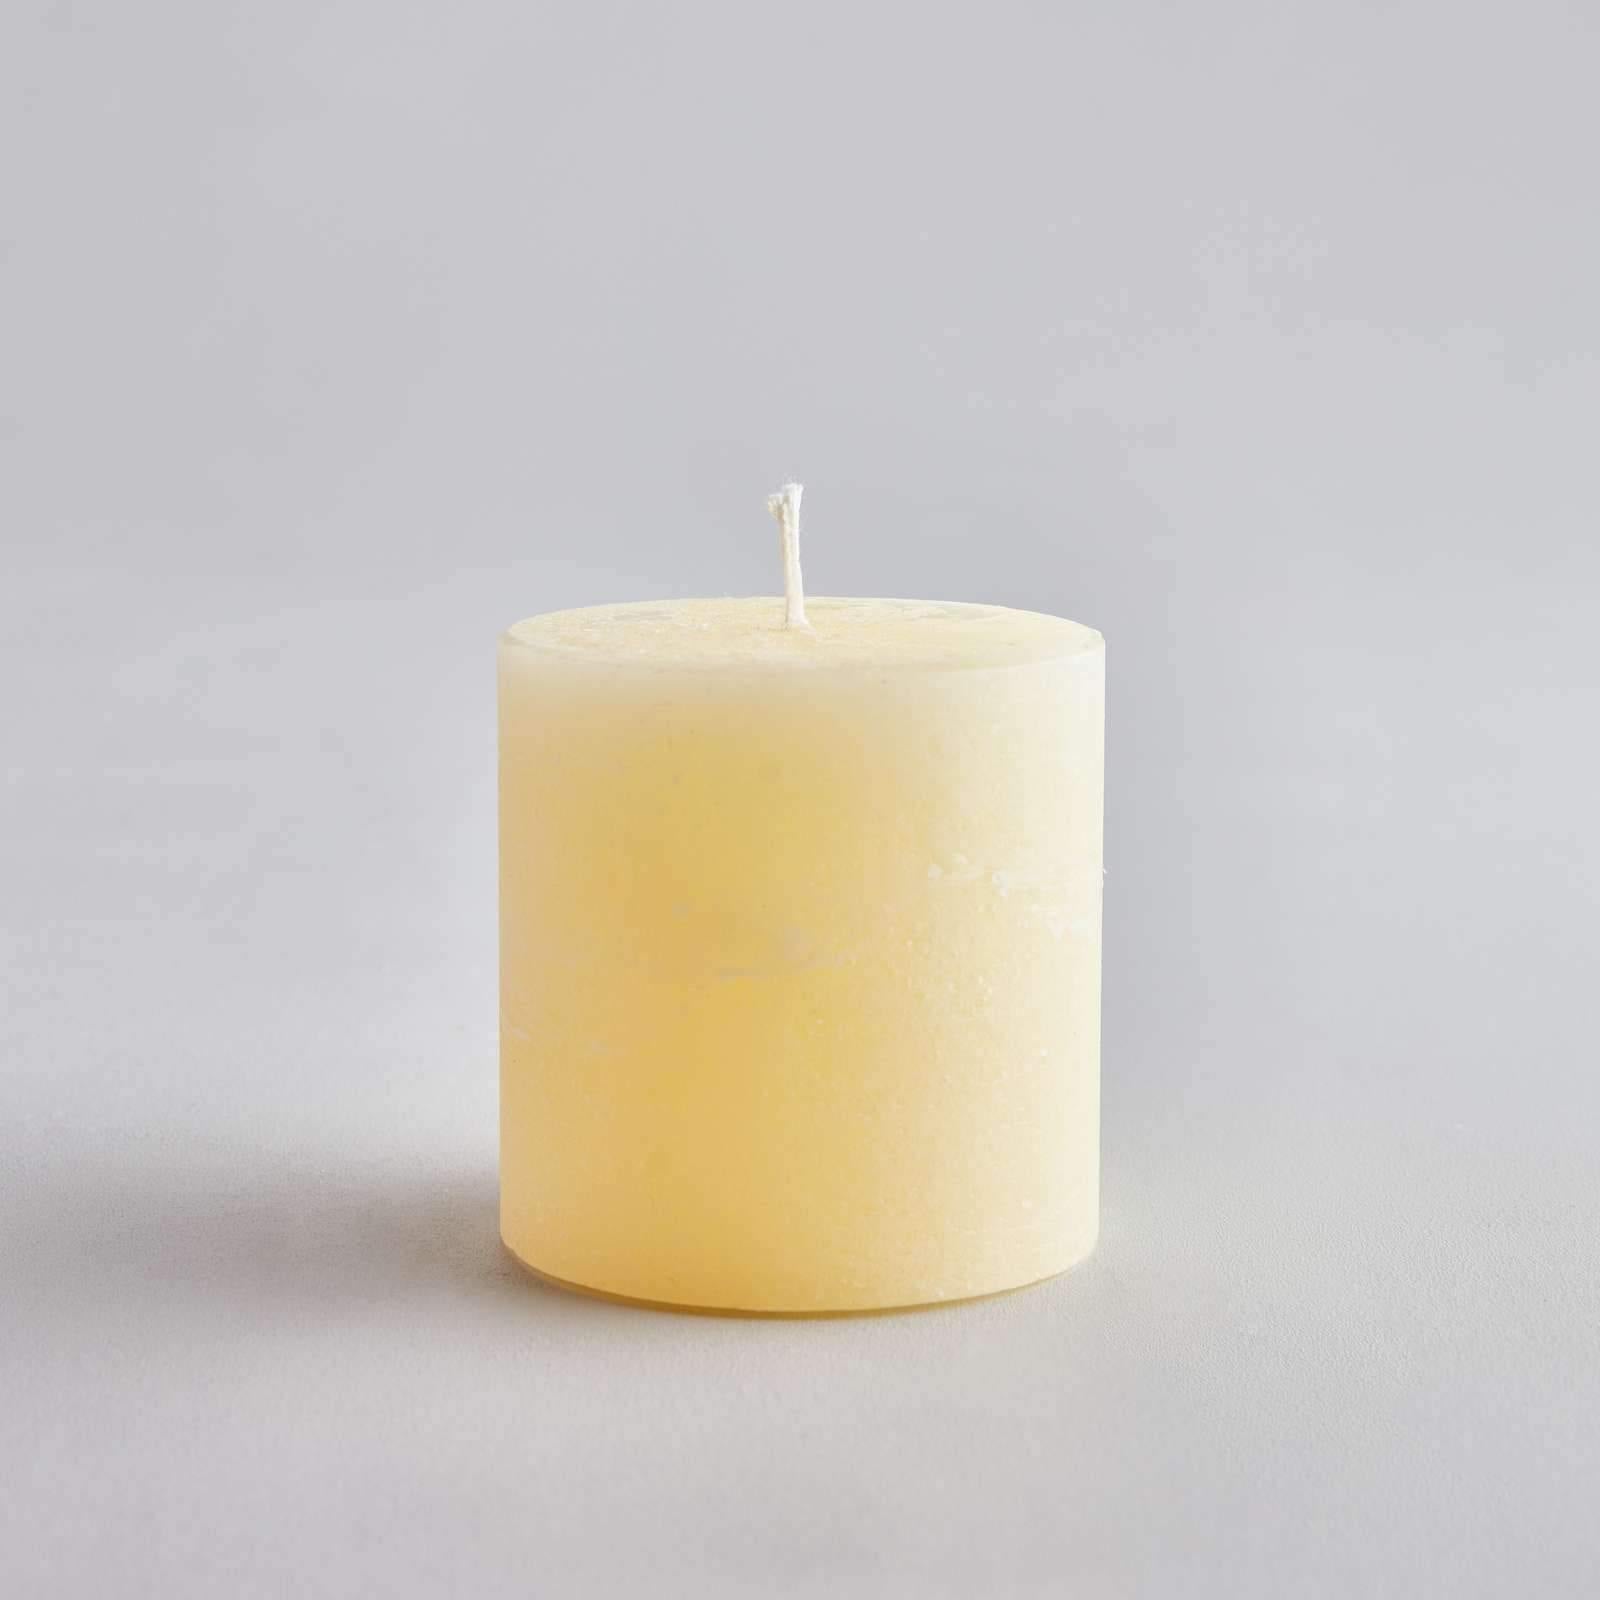 Thyme & Mint Scented 3" x 3" Pillar Candle - Smallhill Furniture Co.